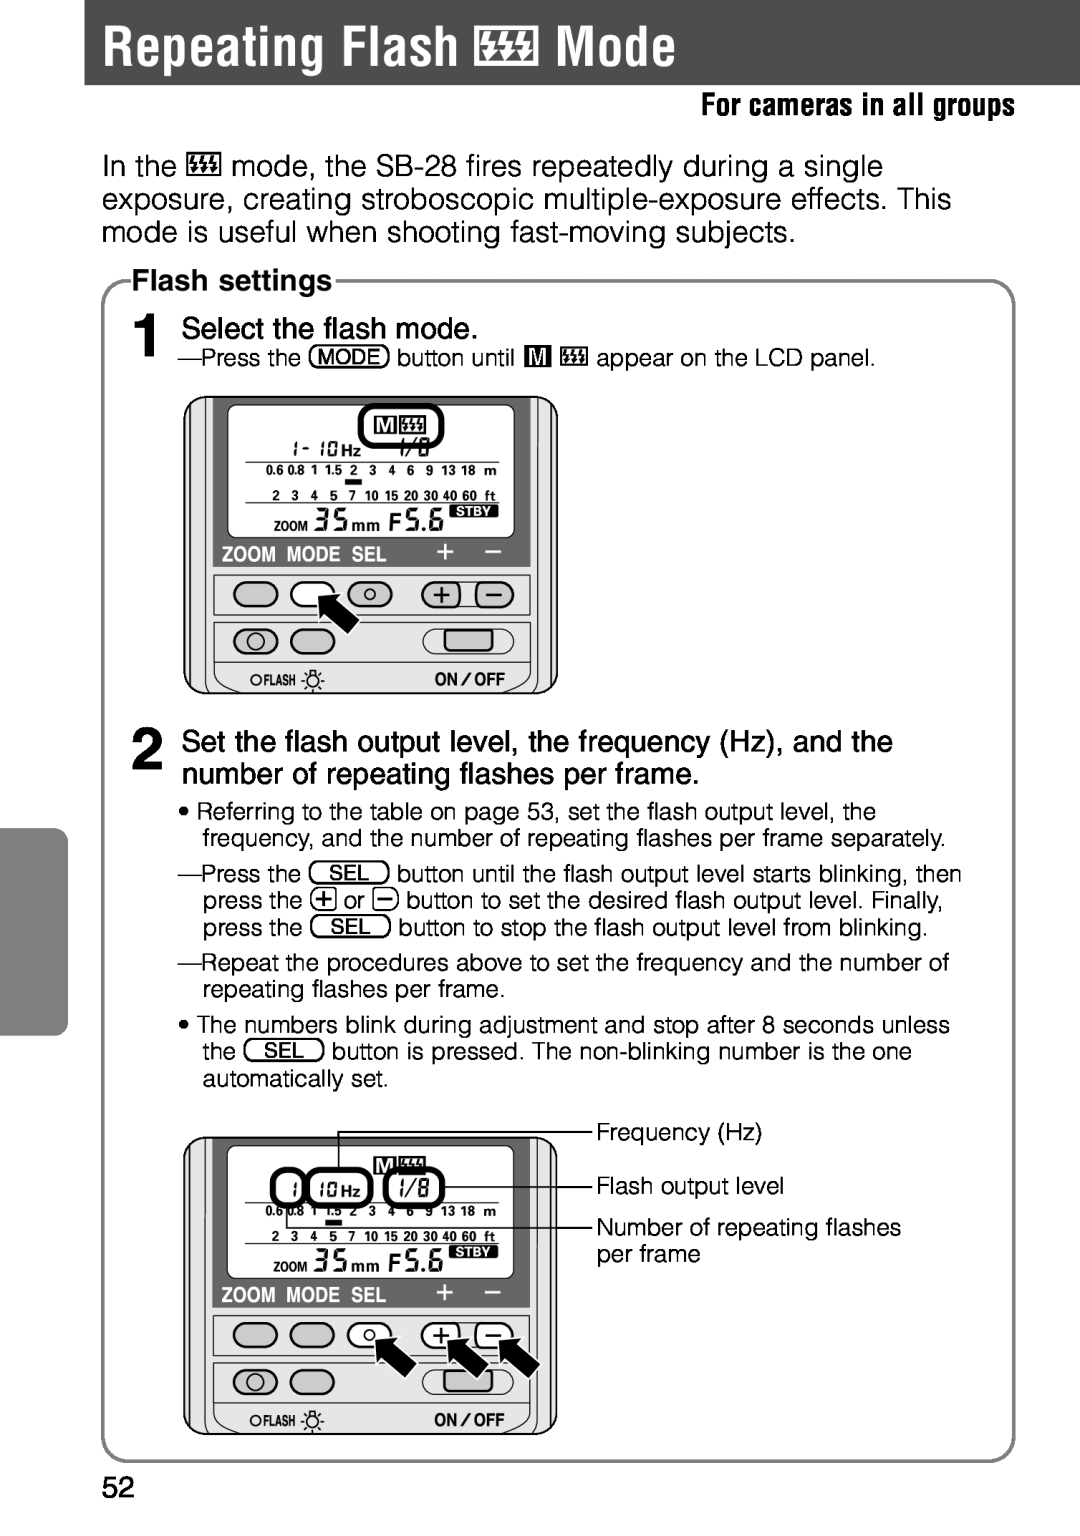 Nikon SB-28 instruction manual Repeating Flash Mode, For cameras in all groups, Flash settings, Select the flash mode 